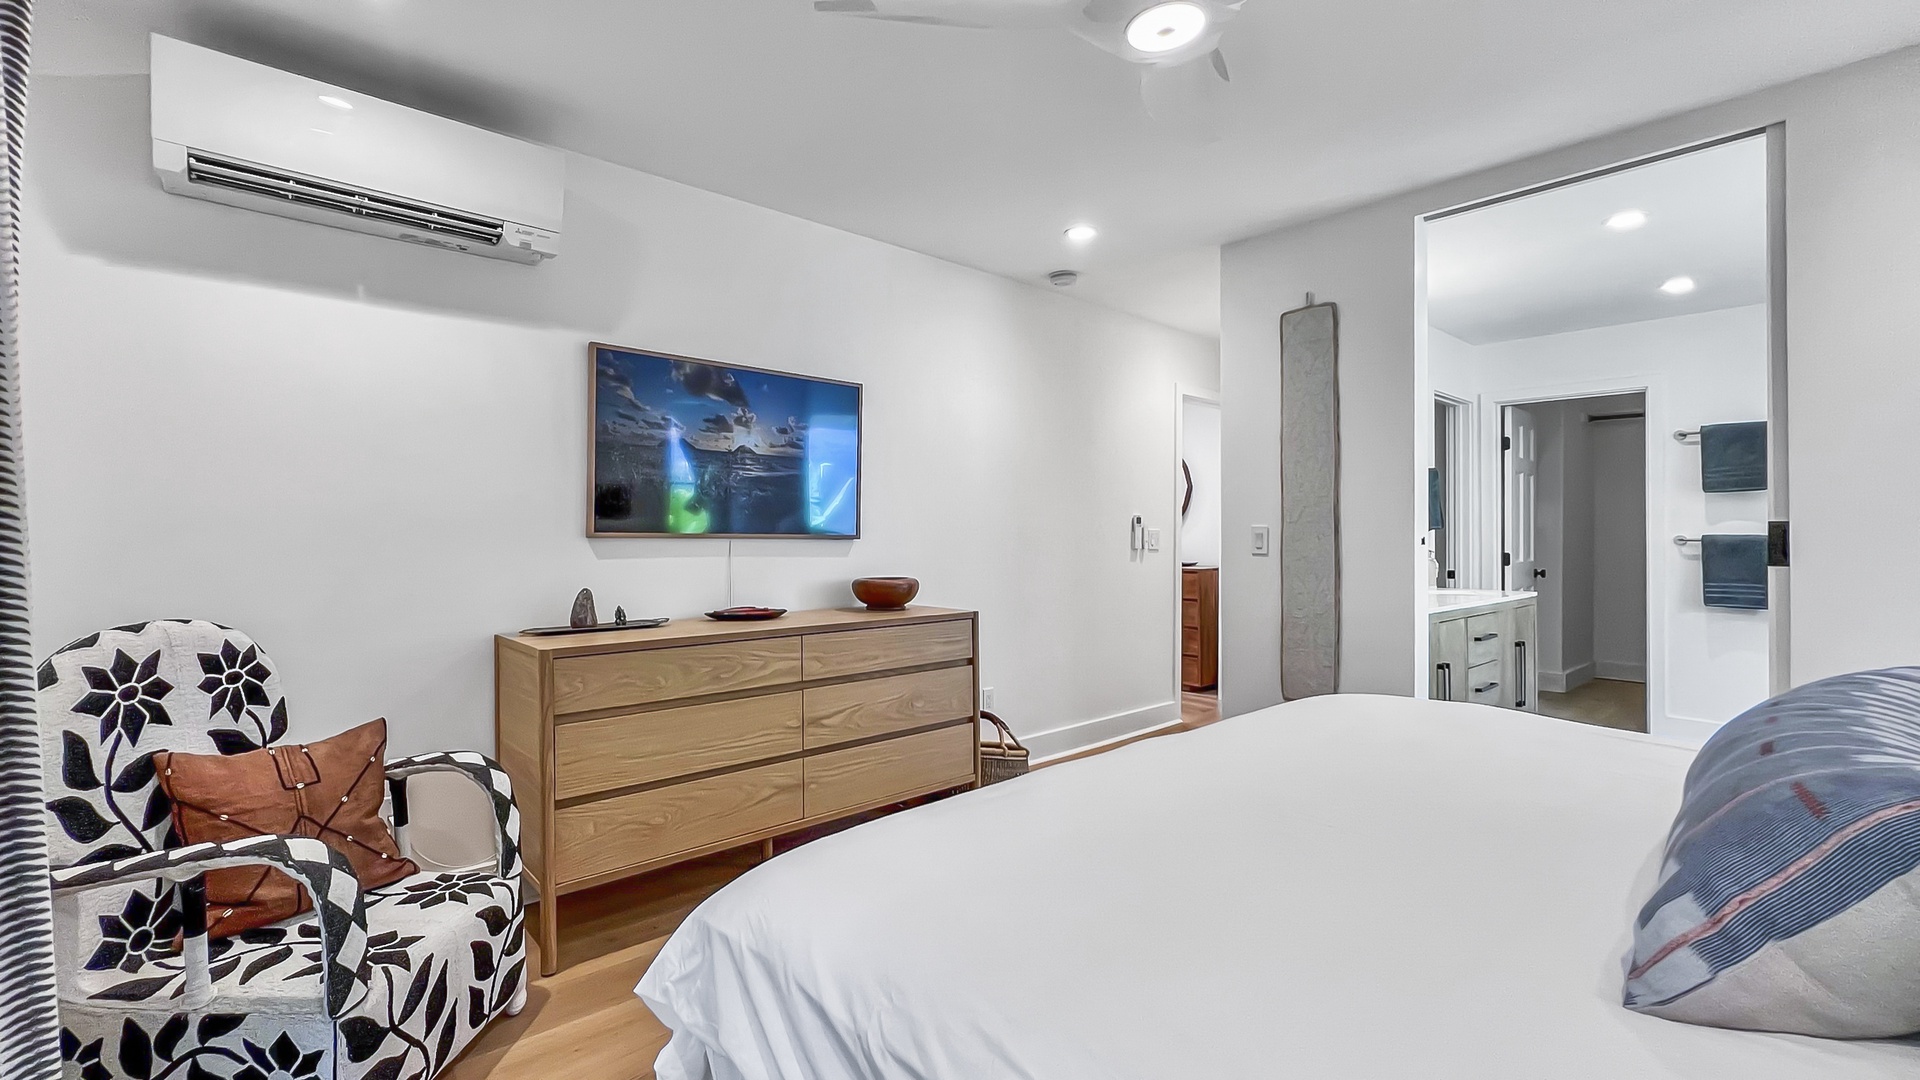 Kailua Vacation Rentals, Lanikai Ola Nani - The primary suite comes with a smart TV and a split-type AC for outmost comfort throughout your stay